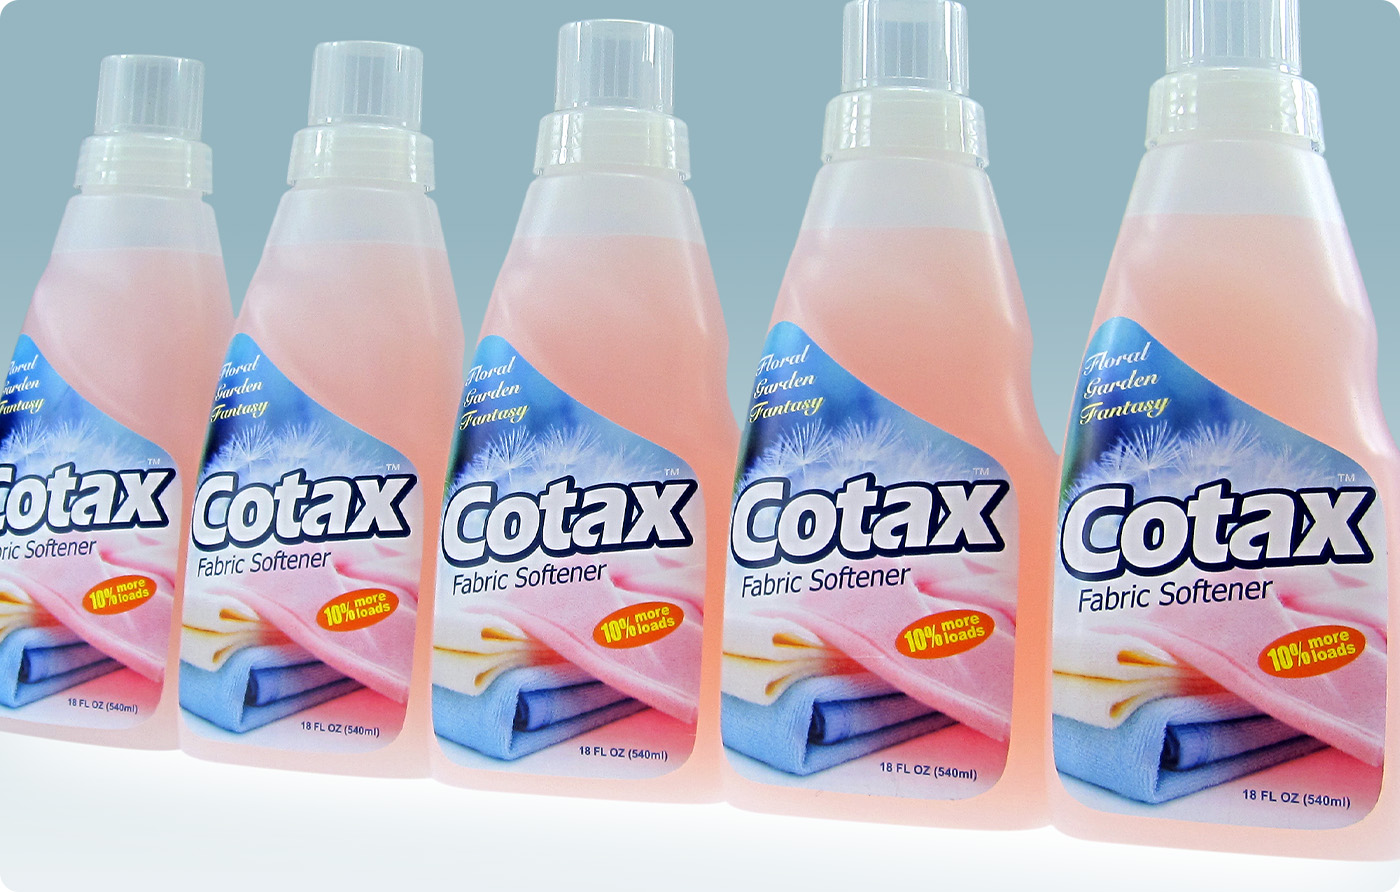 Cotax daily product company-Cotax fabric softener-bottle design